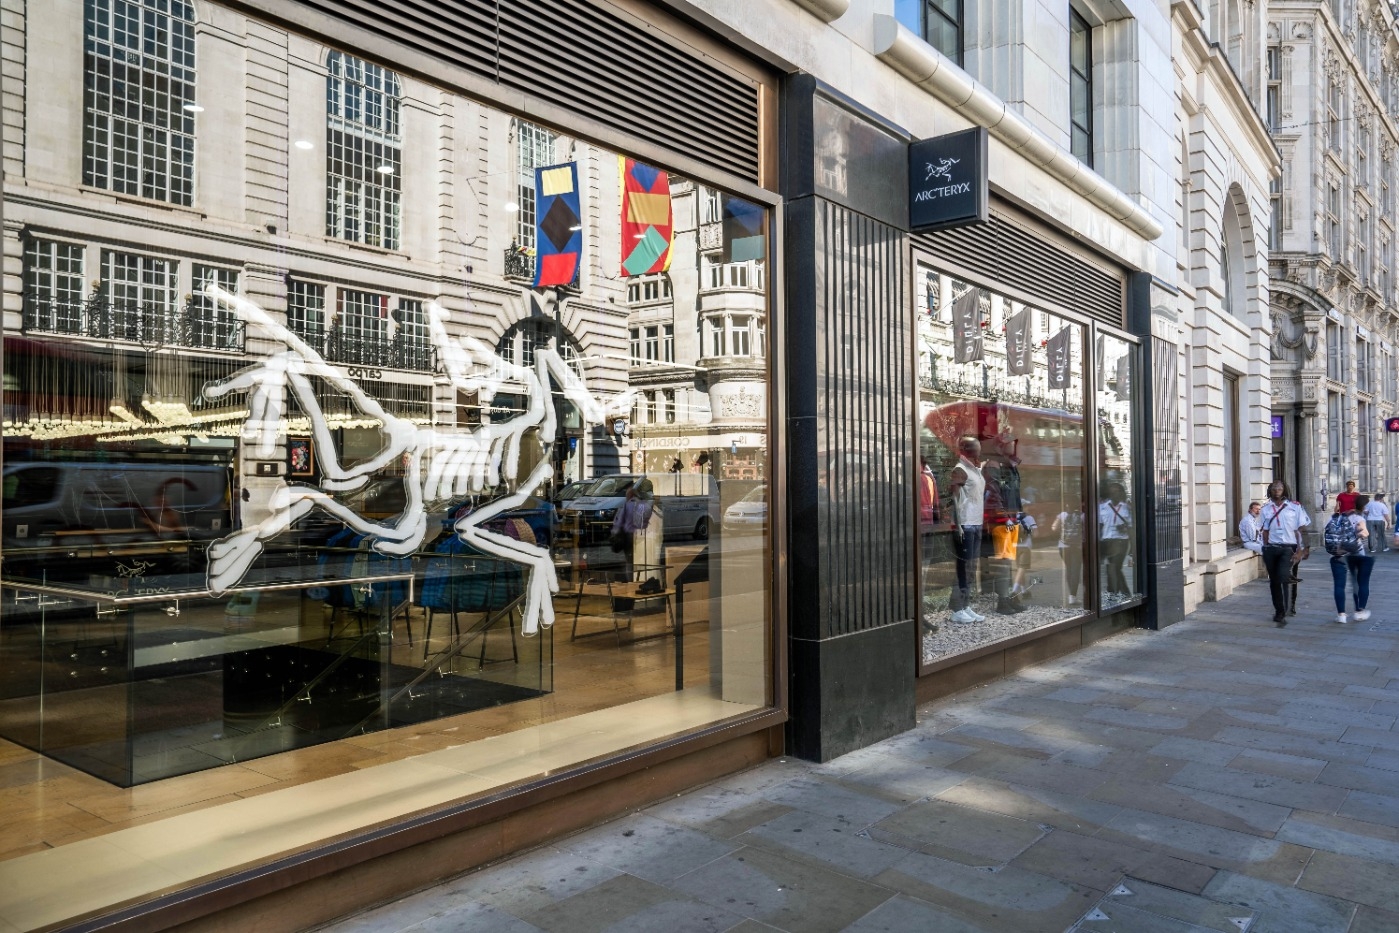 Exterior shot of an Arc'teryx brand store taken from the streets of London